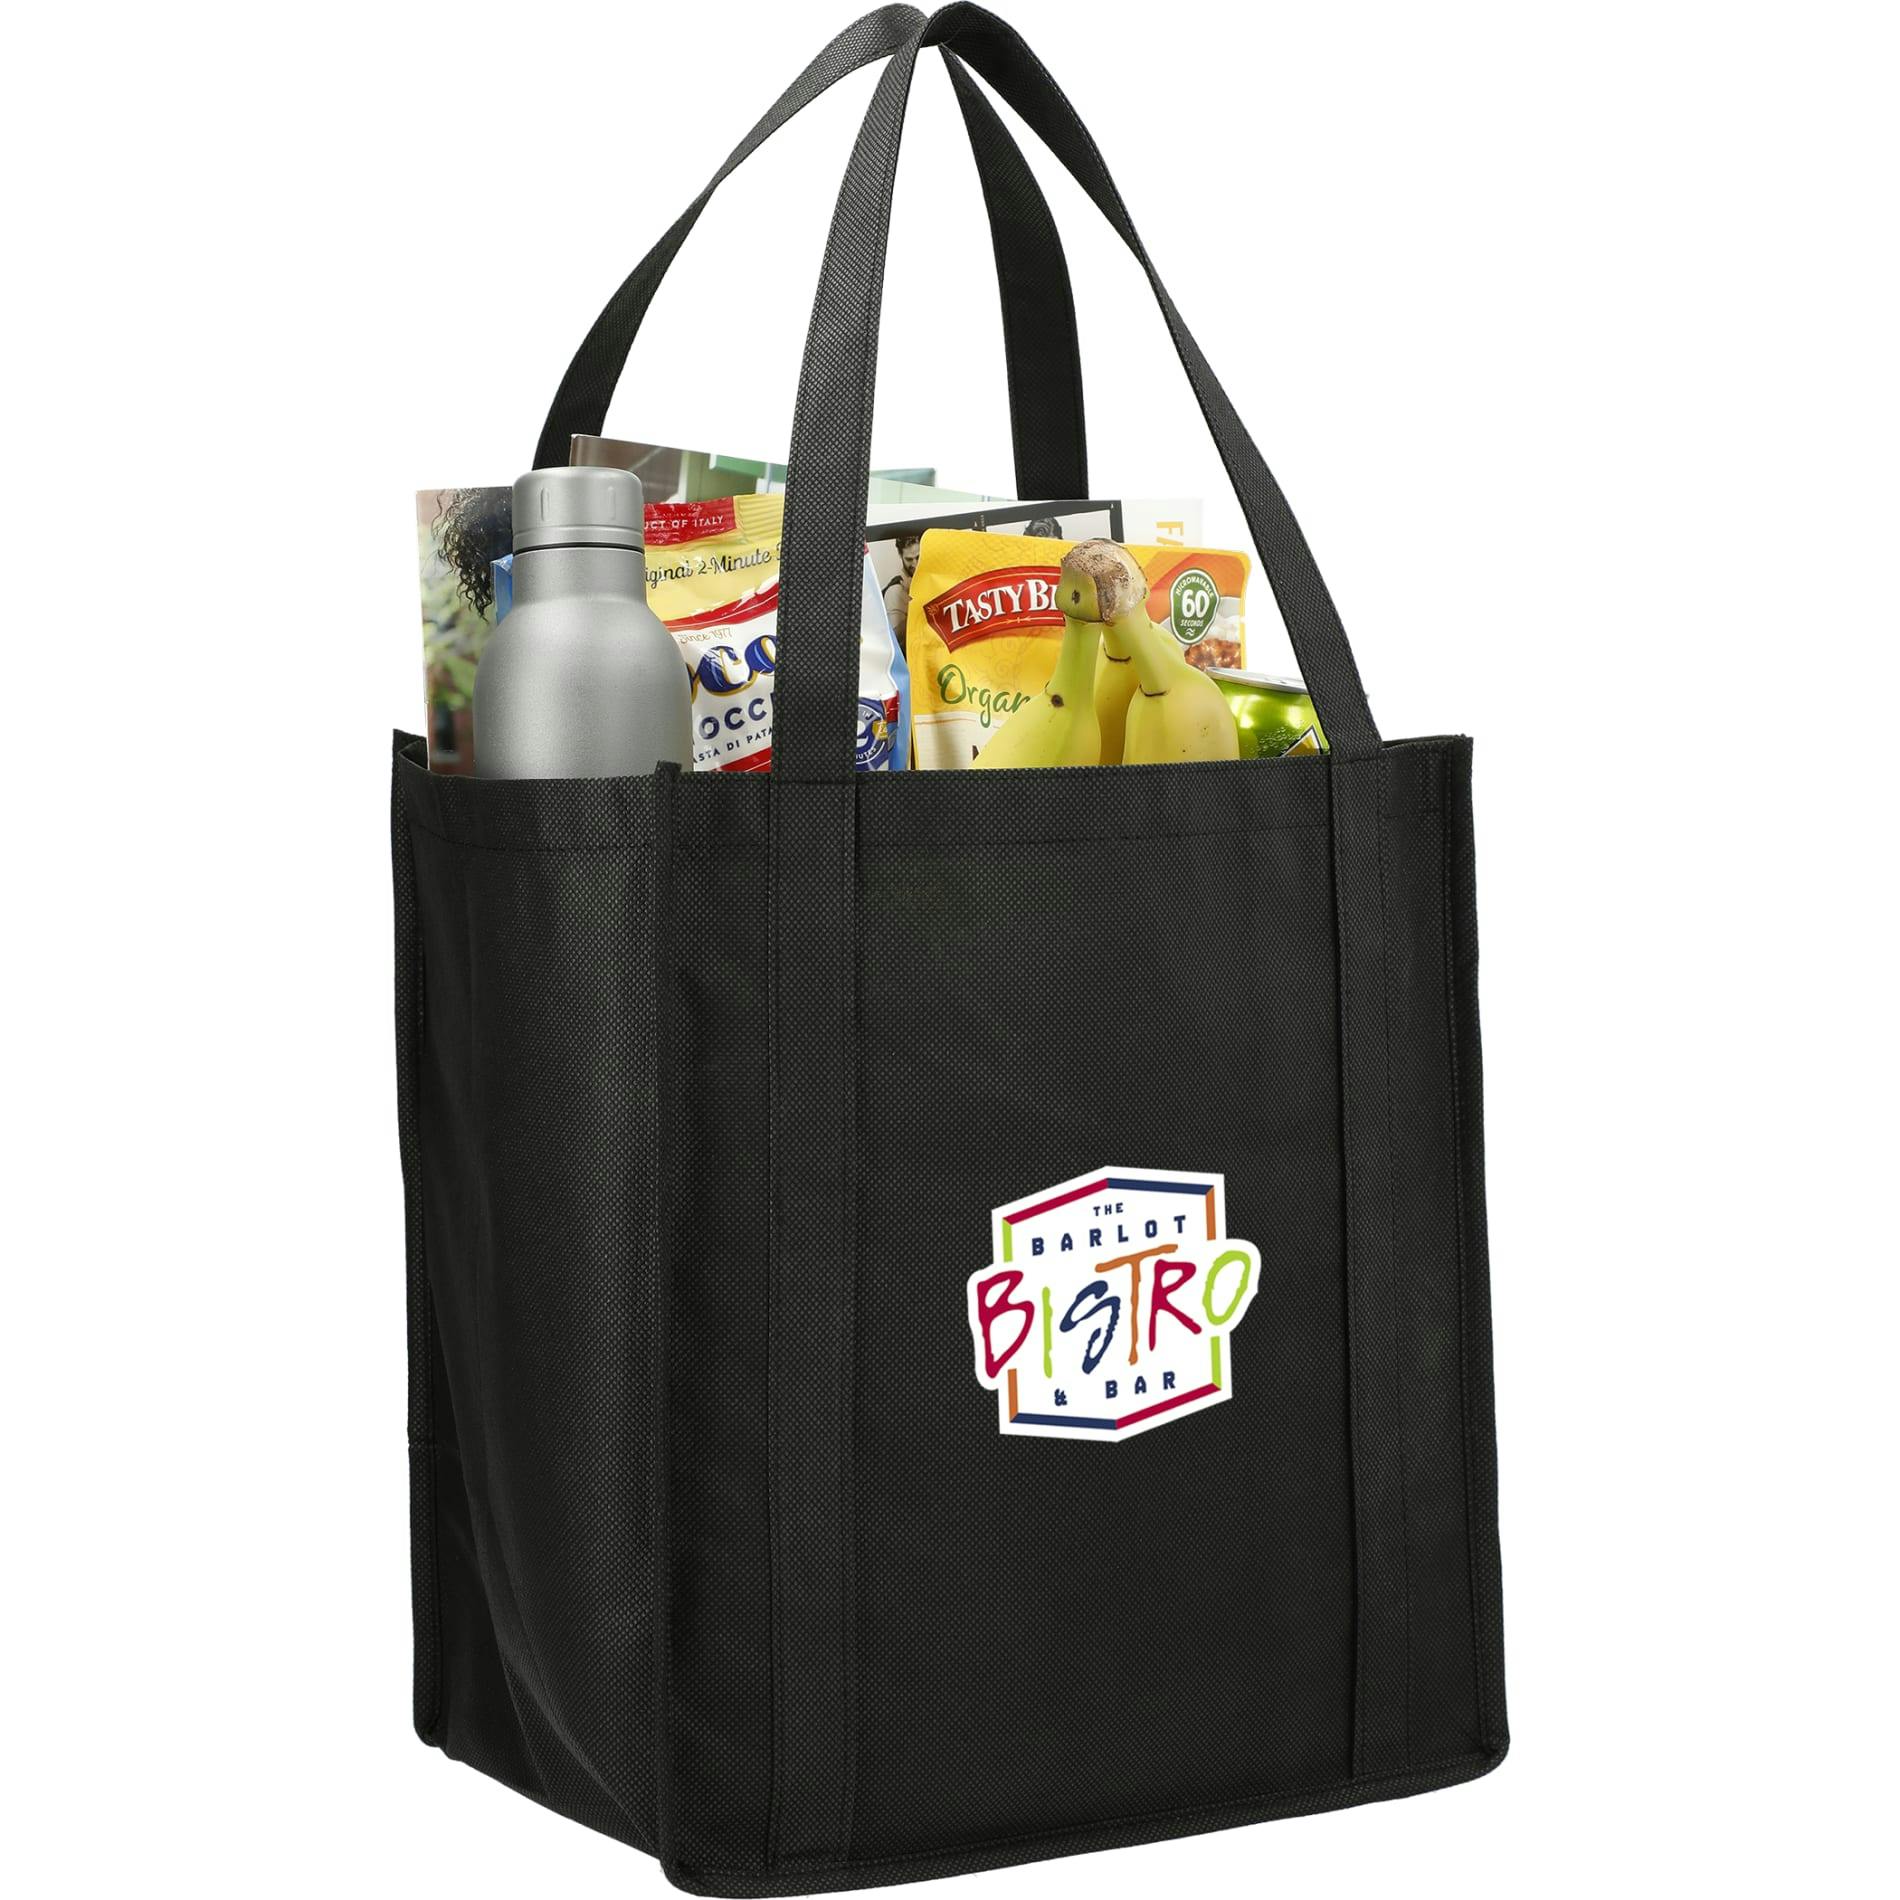 Little Juno Non-Woven Grocery Tote - additional Image 3